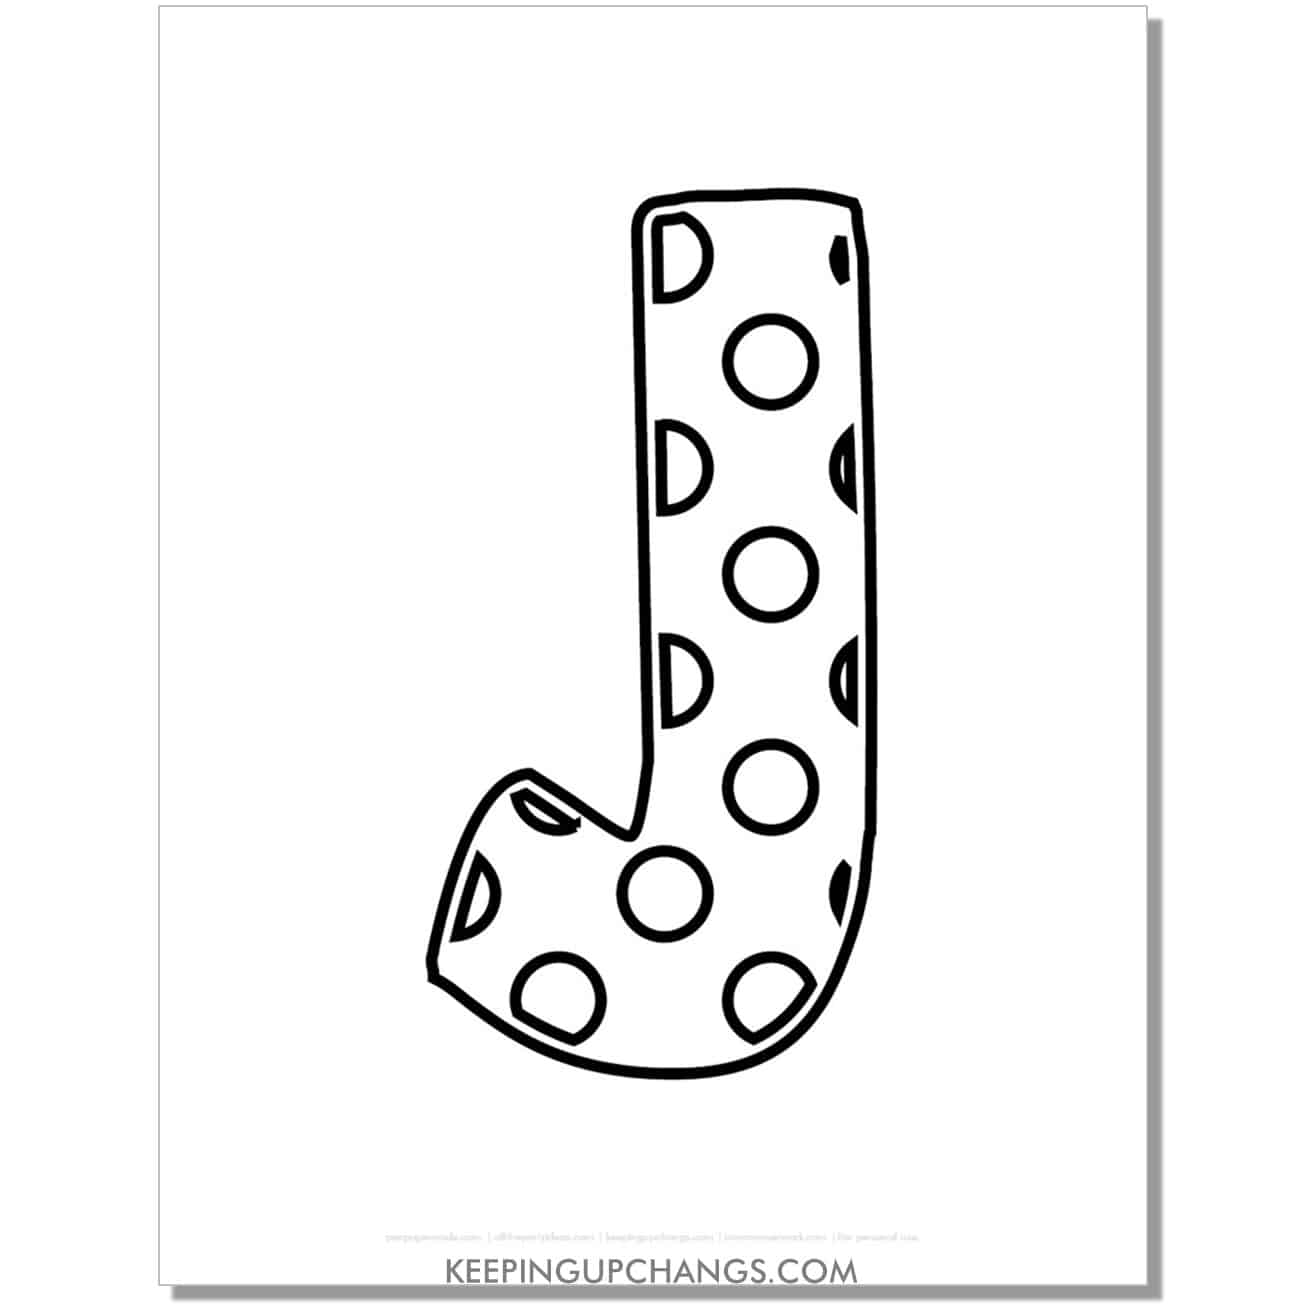 free alphabet letter j coloring page with polka dots for toddlers, preschool, kindergarten.